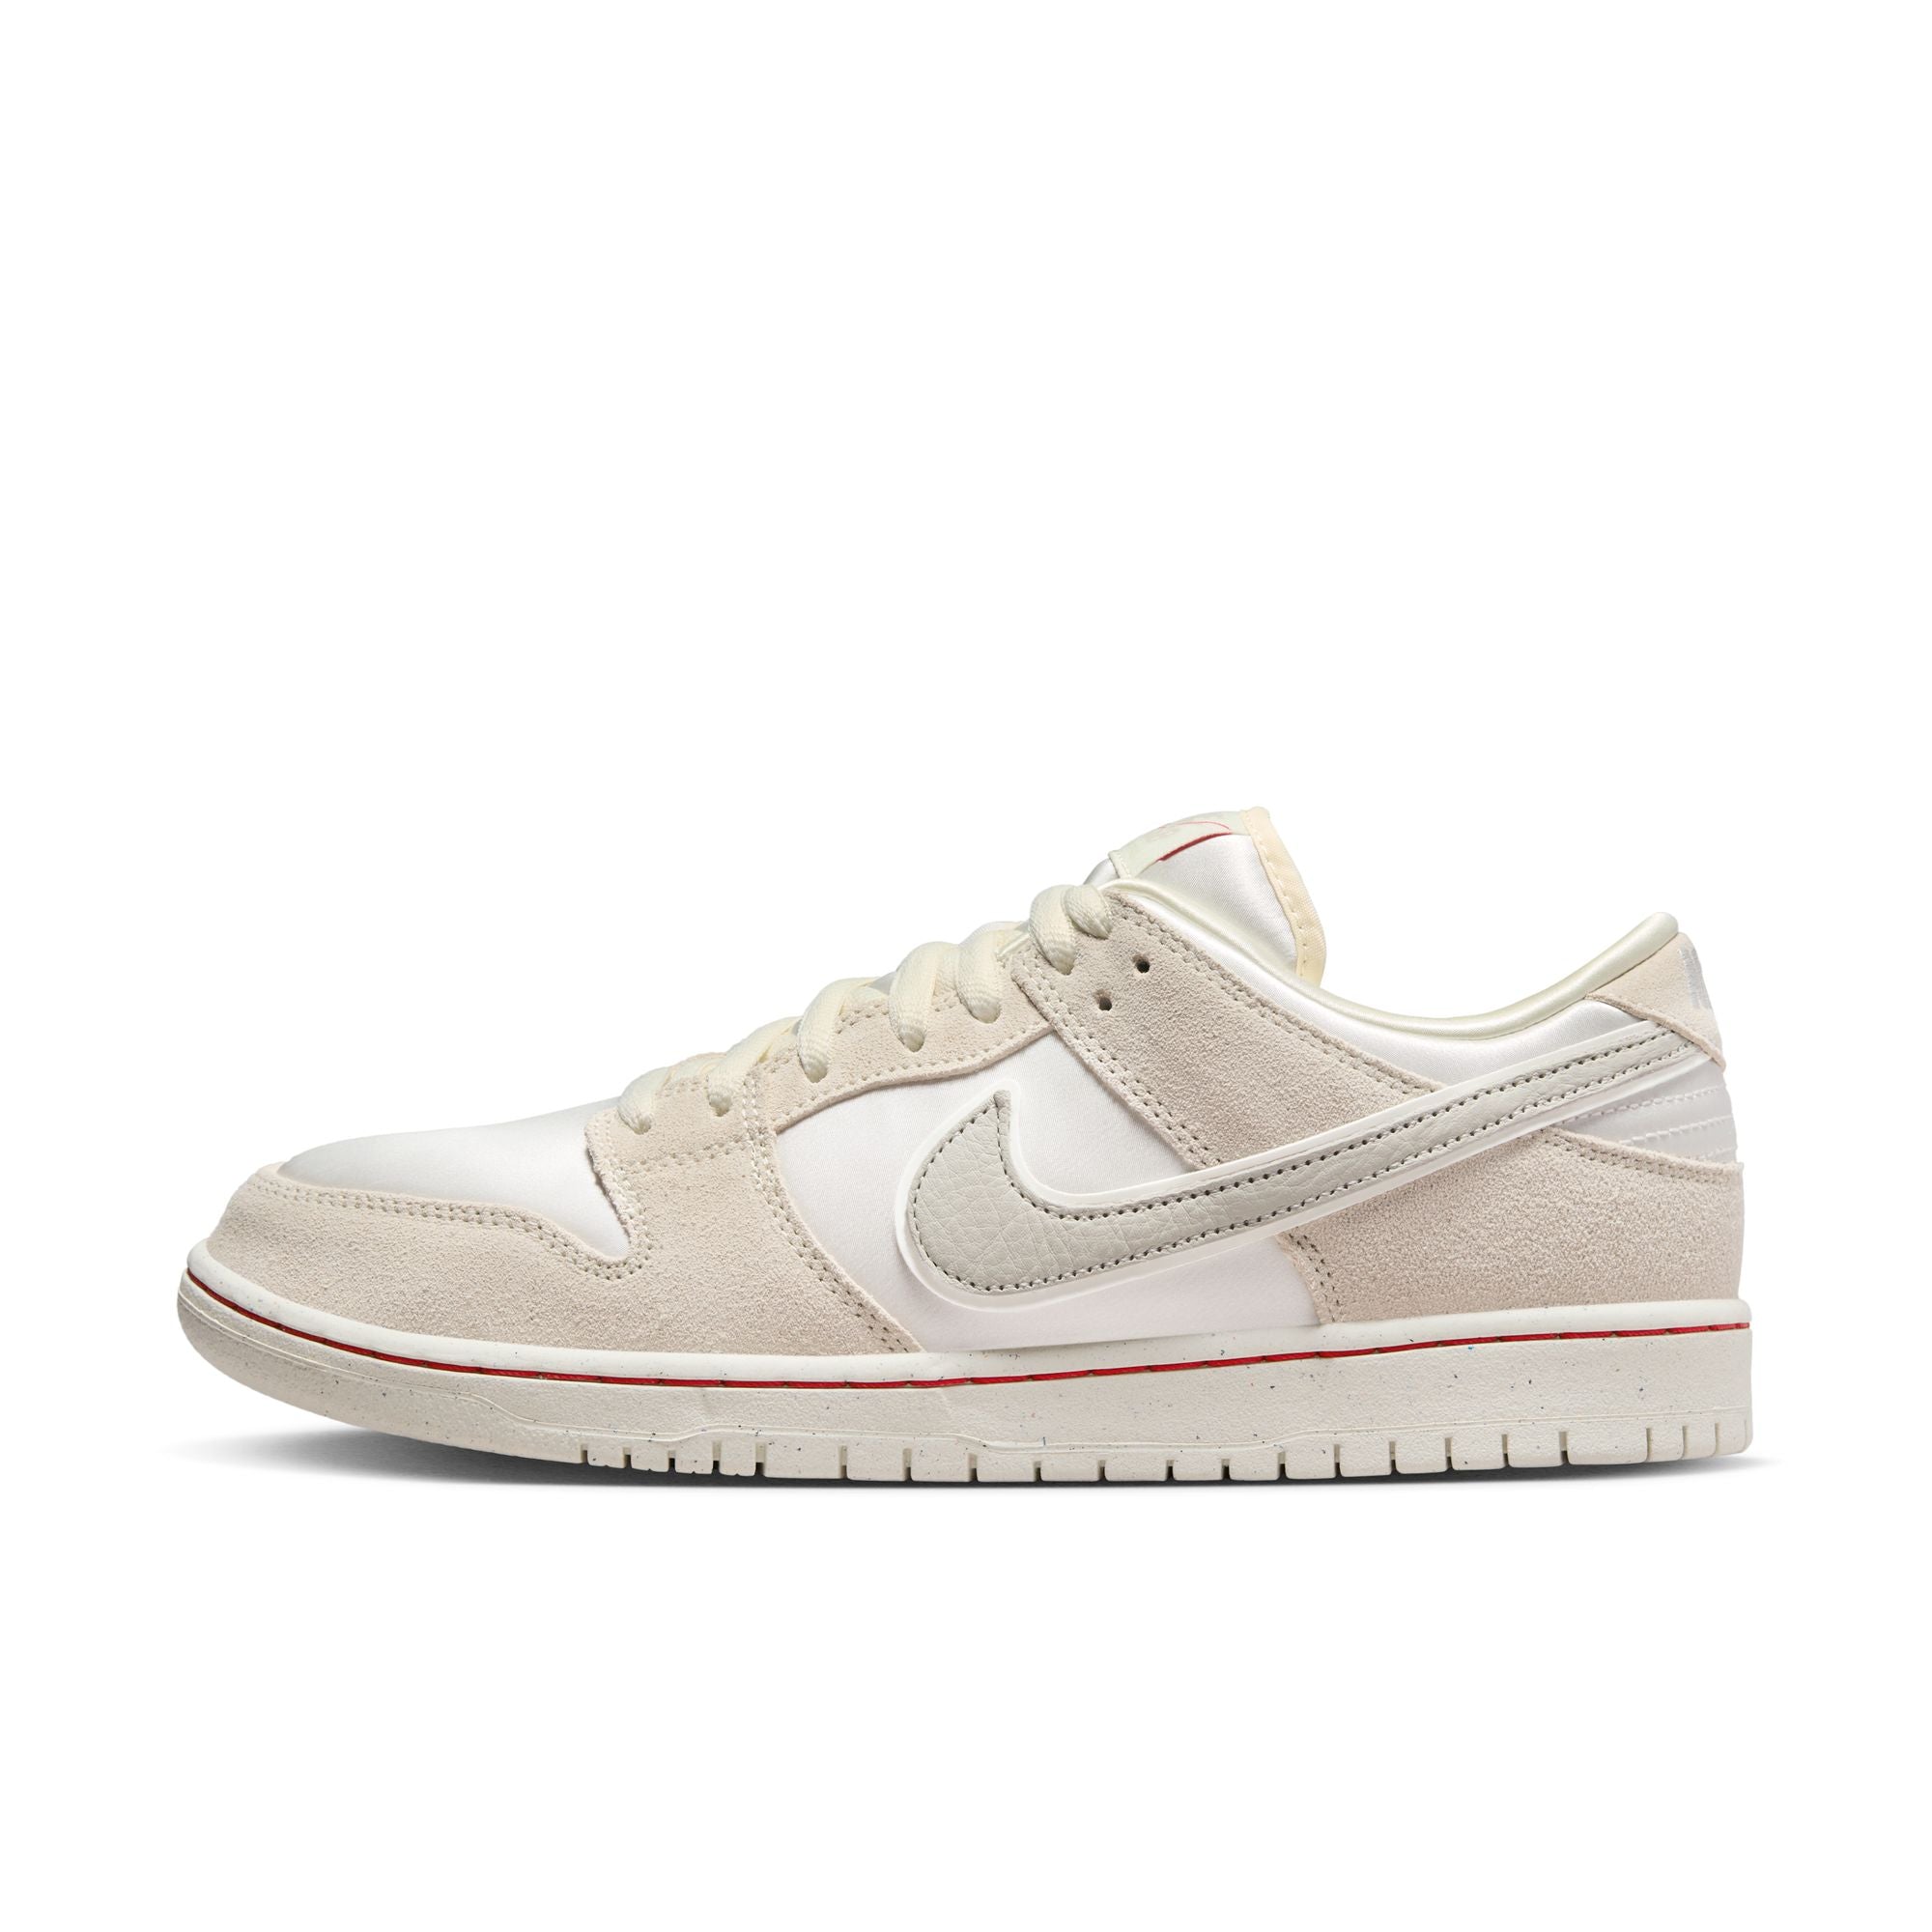 Nike SB Dunk Low 'Black and Gum Light Brown' (CD2563-006) Release Date.  Nike SNKRS CA